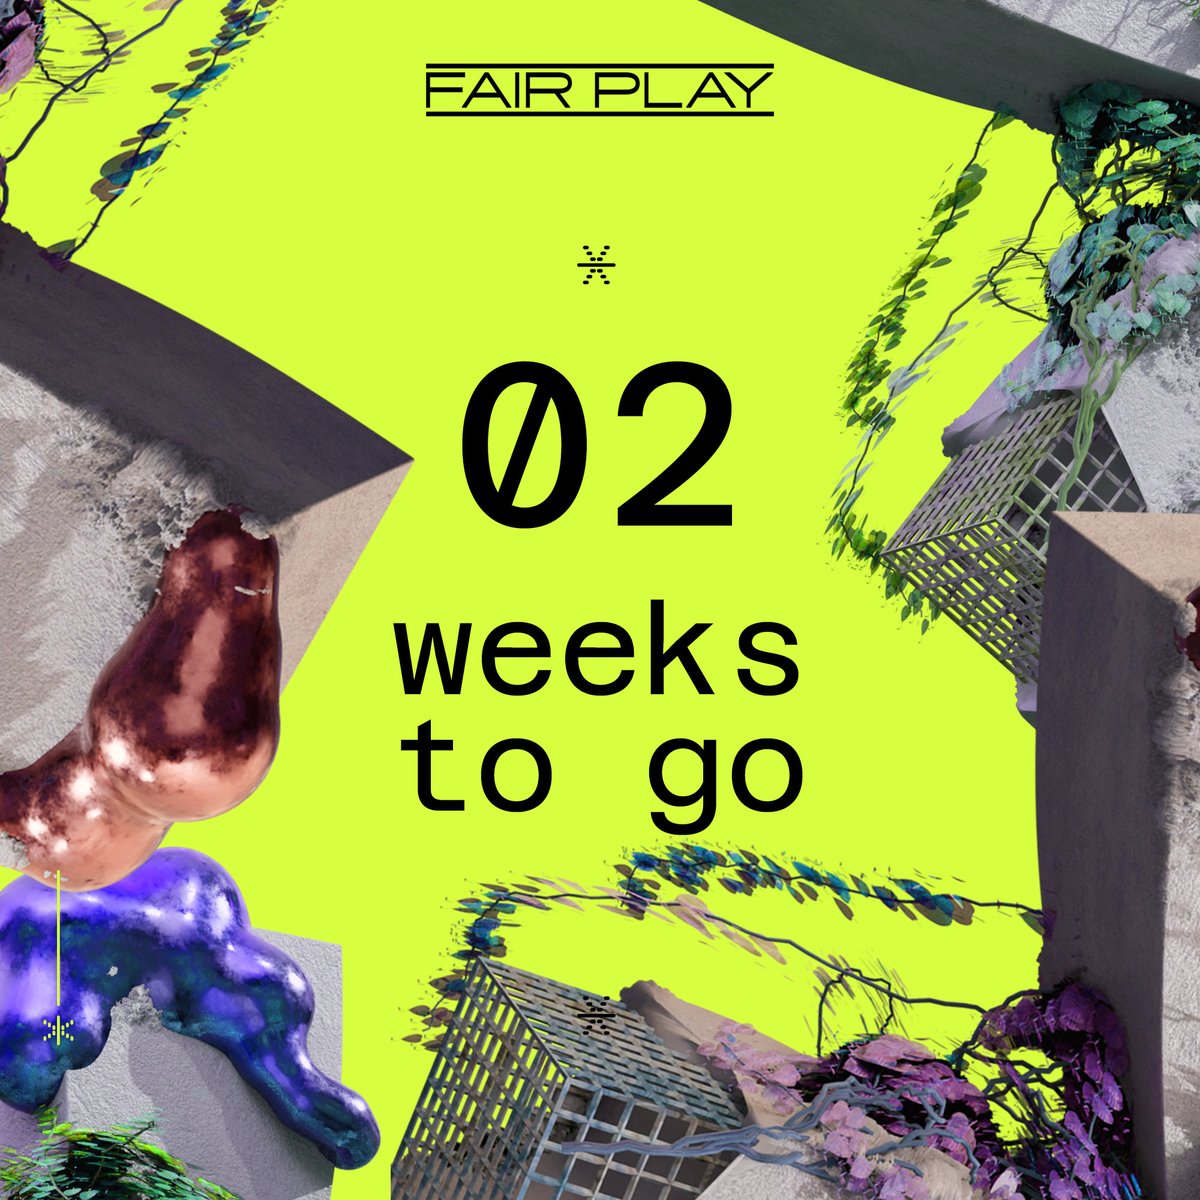 𝗧𝗼𝗱𝗮𝘆 it’s just 2 weeks to go until FAIR PLAY takes over @bandonthewall, @soupmanchester, @gulliverspub, @thecastlehotel + @The_Peer_Hat with 40+ acts! Handful of third-release left so we’ll be moving on to our final release of tickets this Monday: linktr.ee/fairplayfest